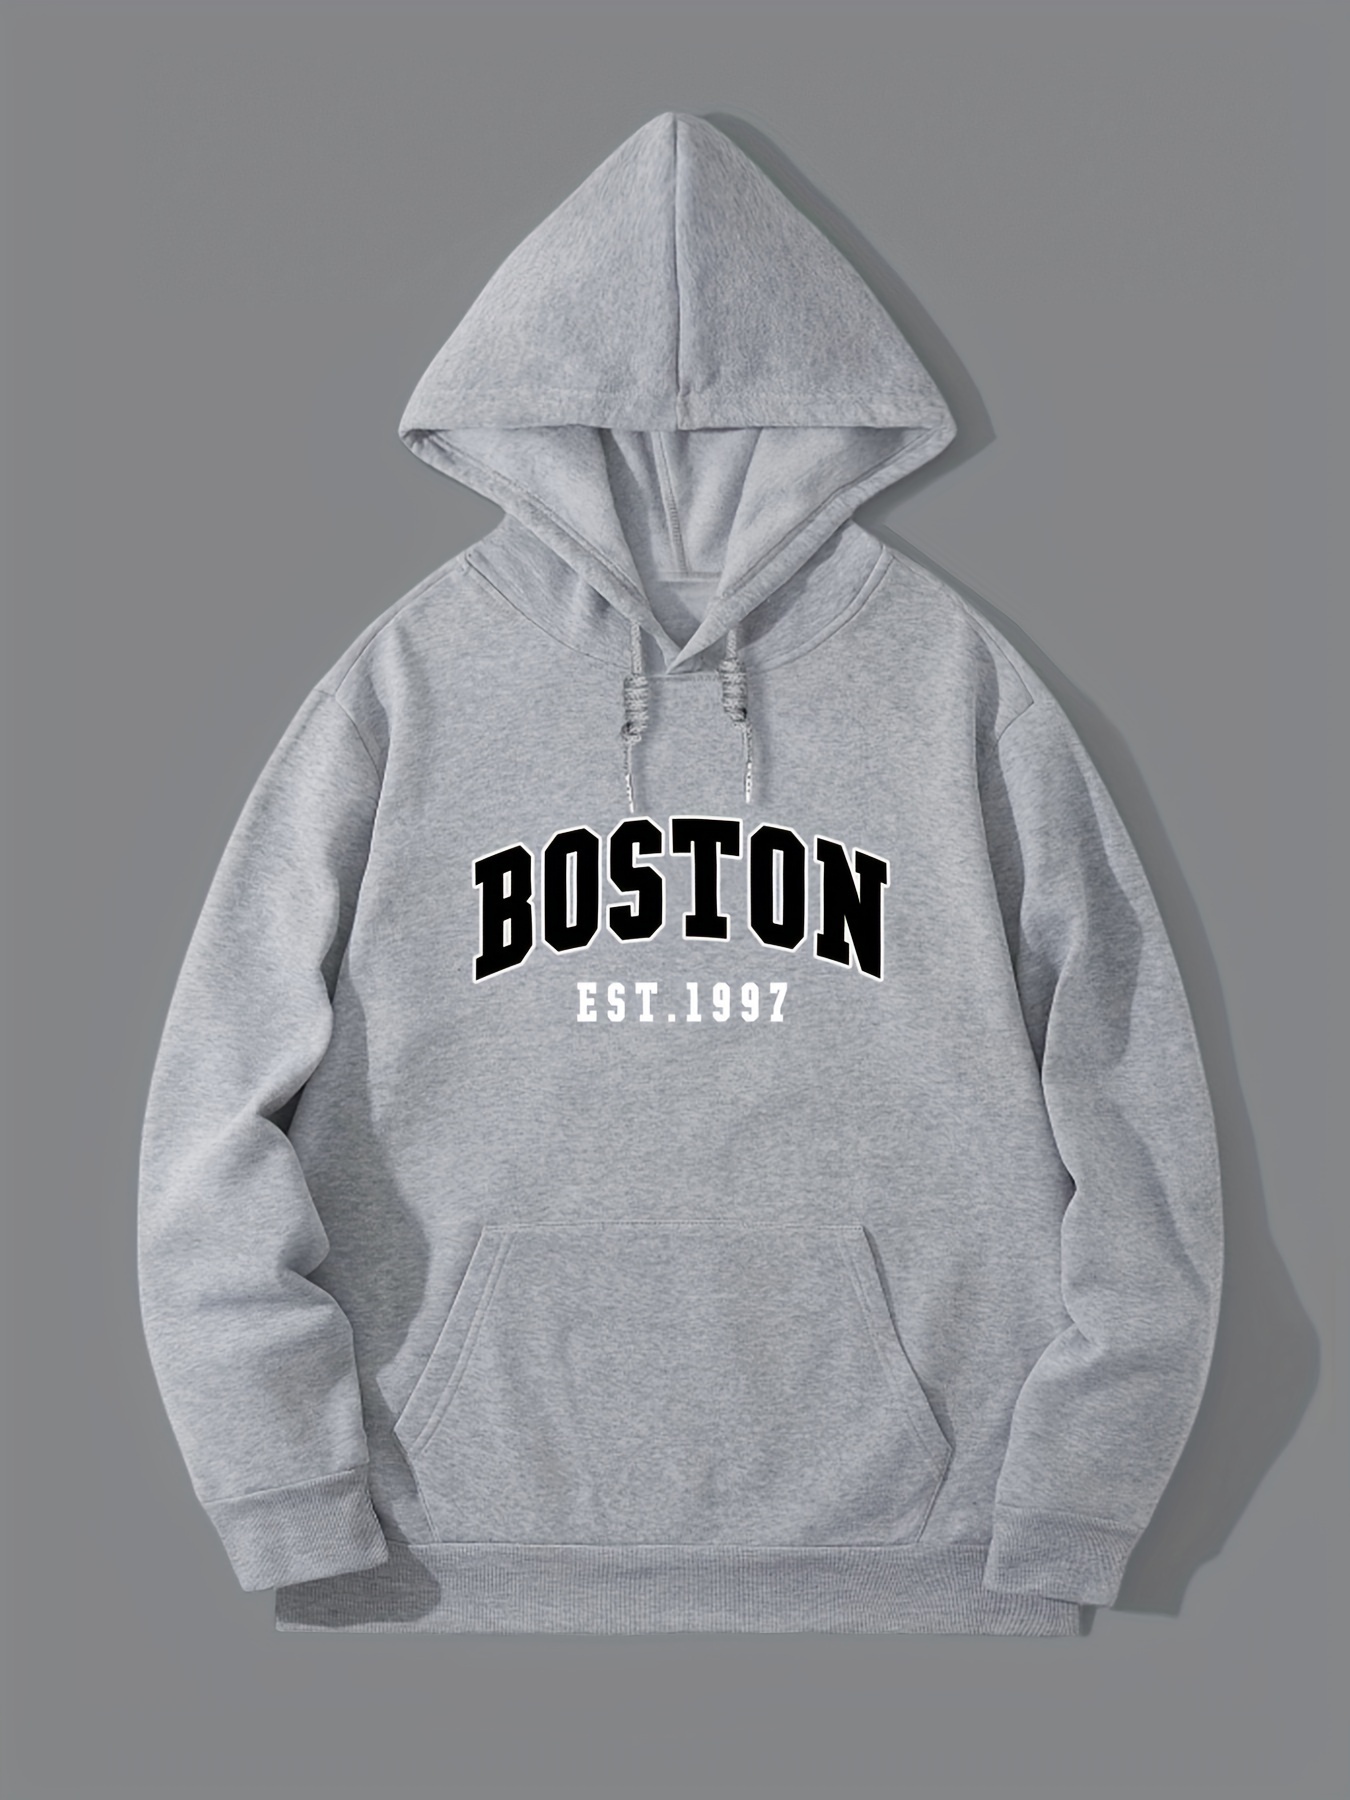 boston print mens hooded sweatshirt with kangaroo pocket mens chic pullover tops for fall winter details 6